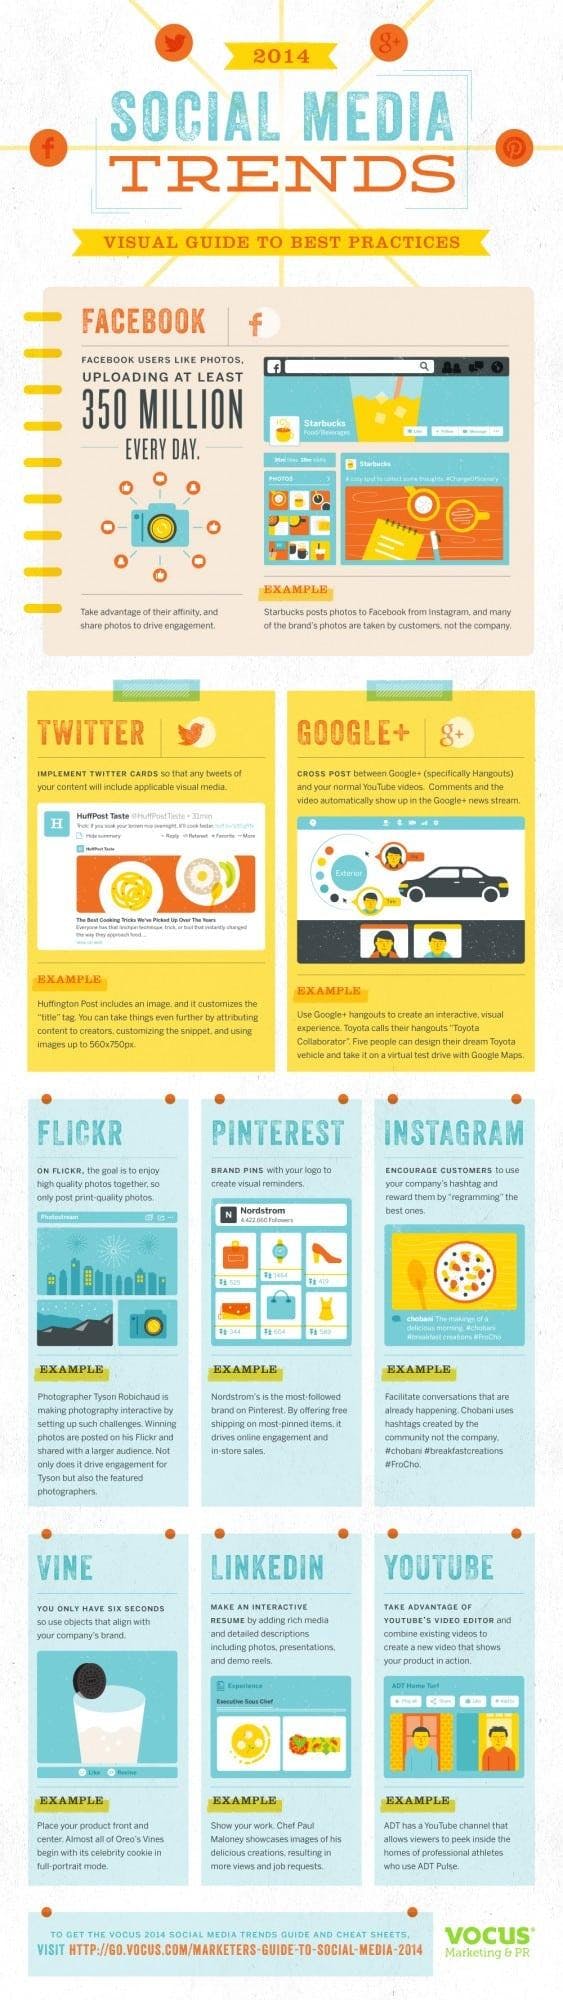 Social-Media-Best-Practices-Infographic